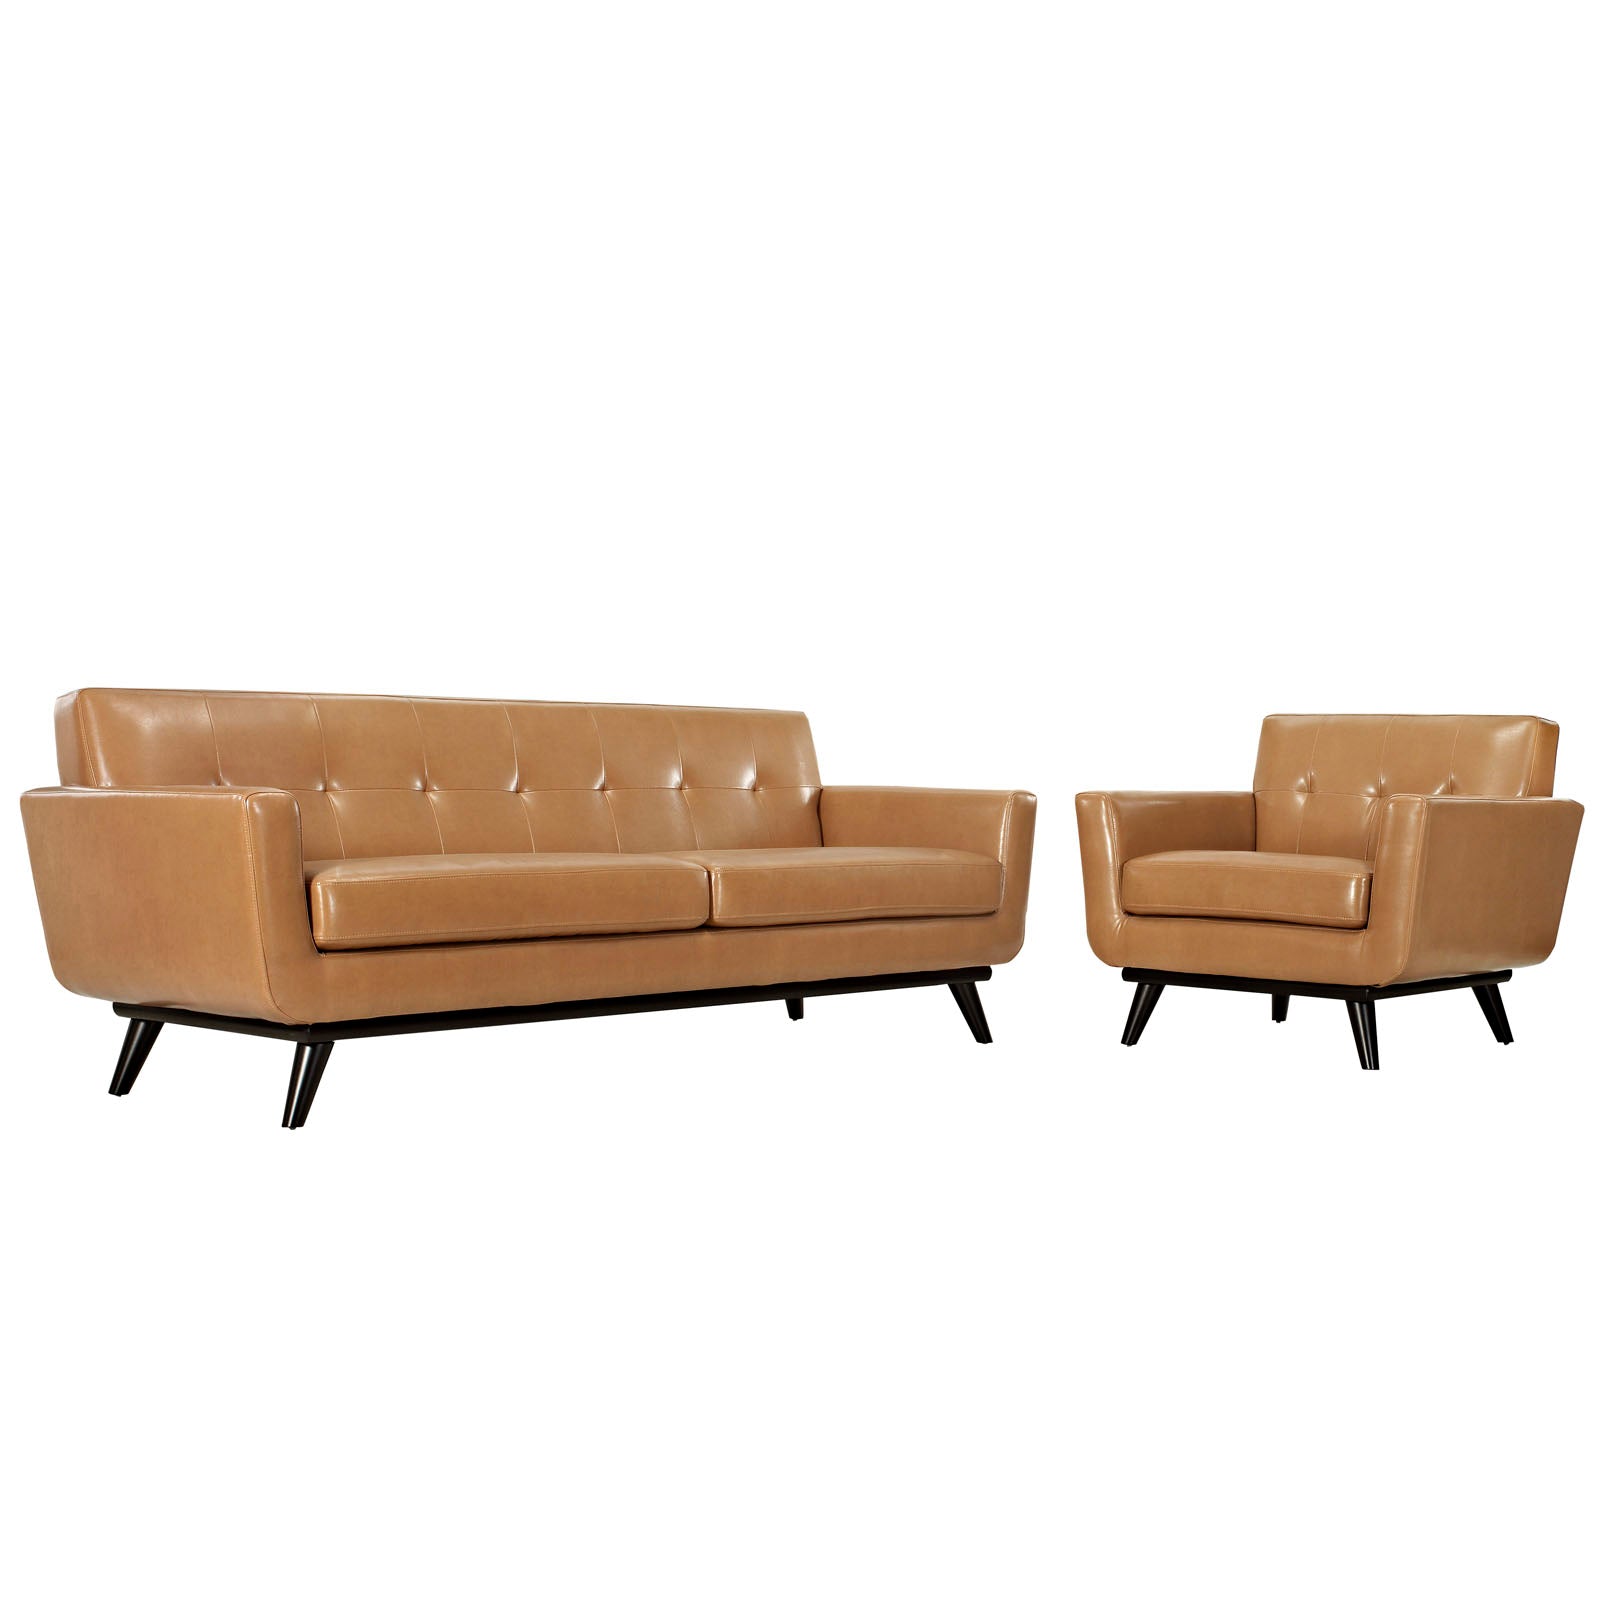 Engage 2 Piece Leather Living Room Set - East Shore Modern Home Furnishings